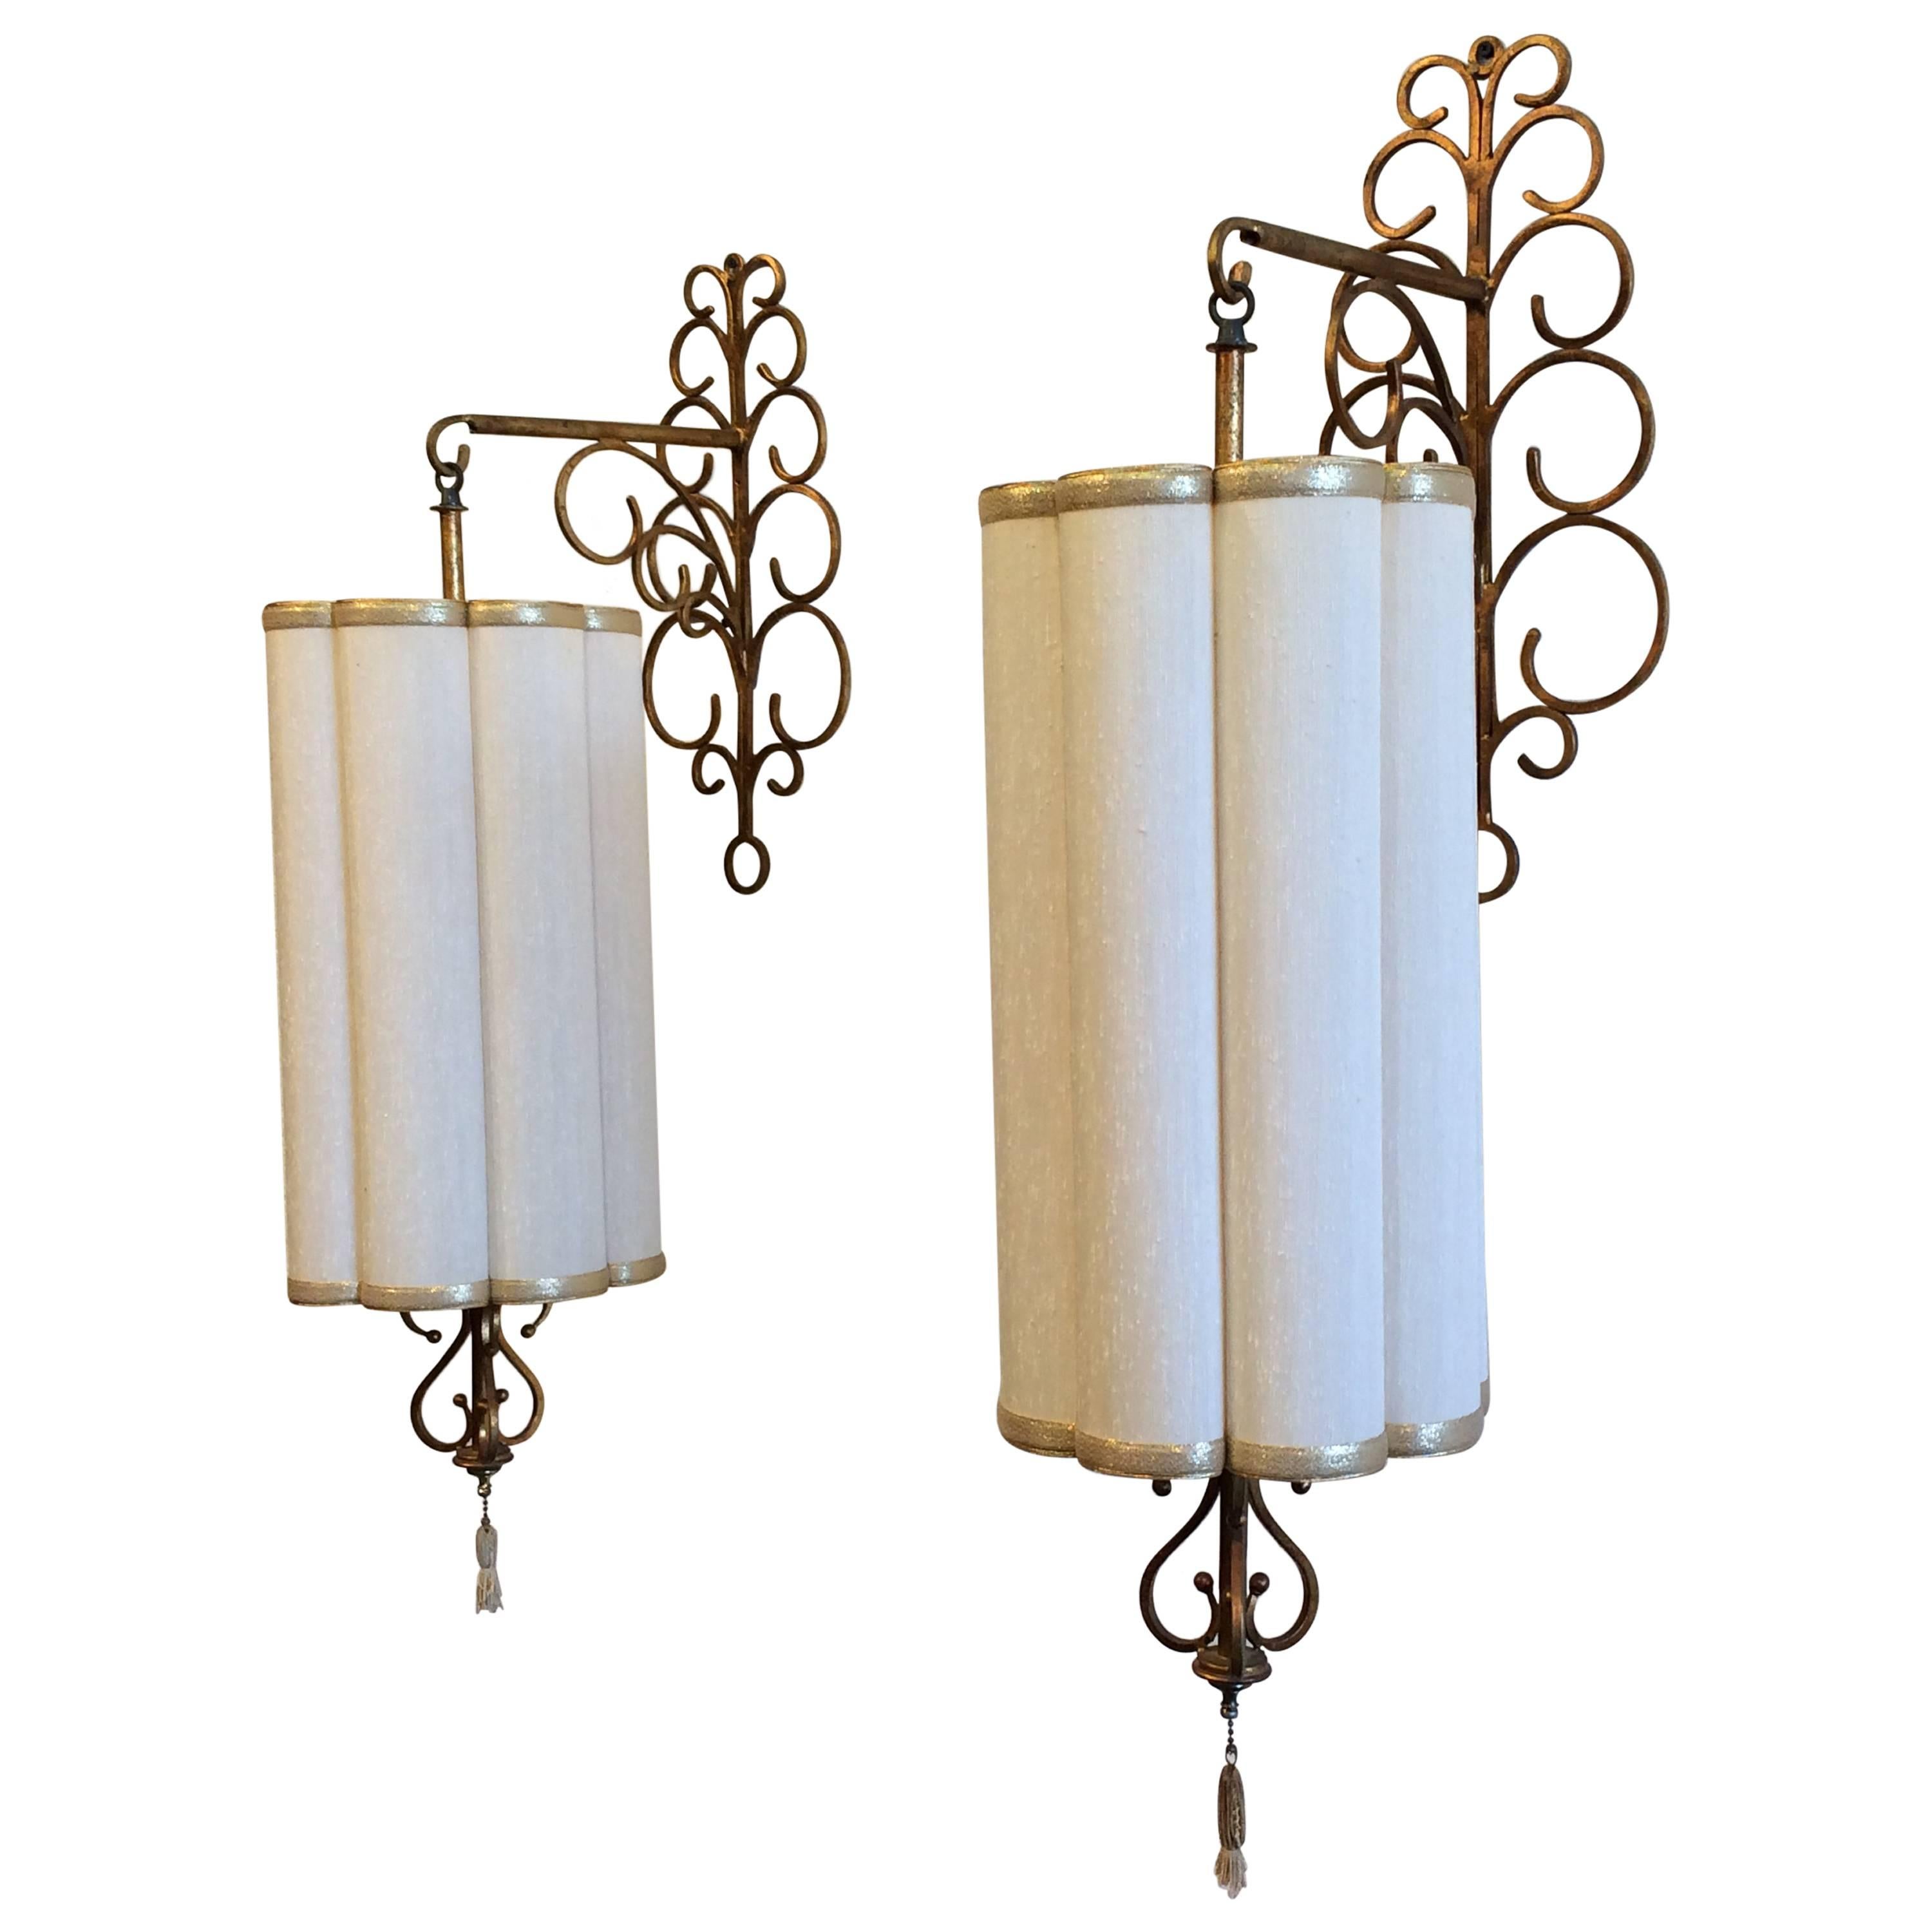 Decorative Italian Gilded Iron Wall Lamps Scones with Shades